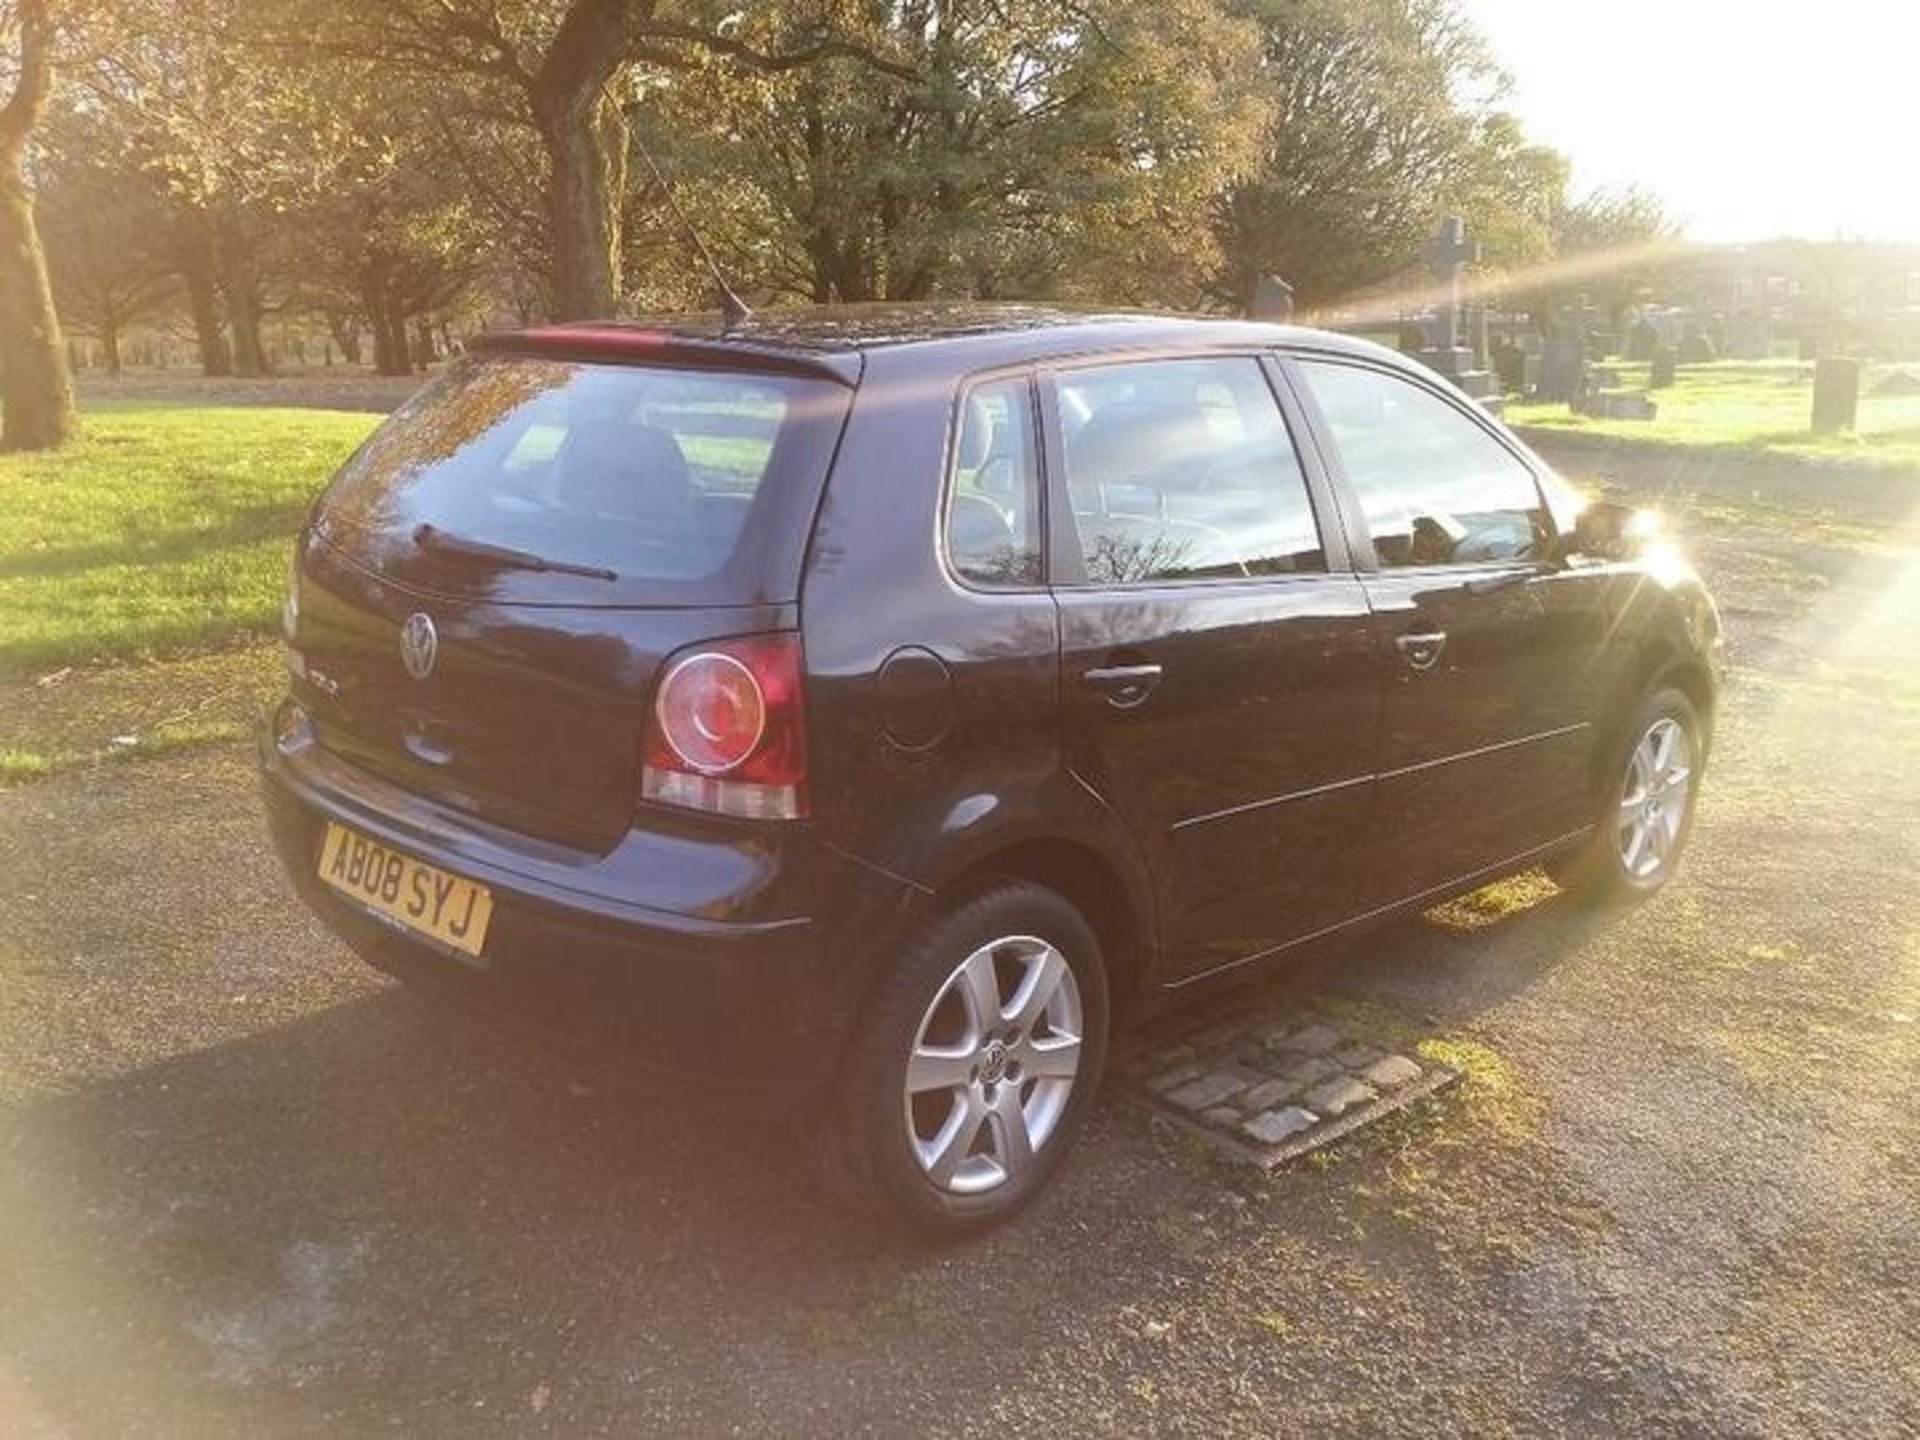 VOLKSWAGEN, POLO 1-2 MATCH, AB08 SYJ, 1-2 LTR, PETROL, MANUAL, 4 DOOR HATCH, 06.06.2008, CURRENT - Image 4 of 16